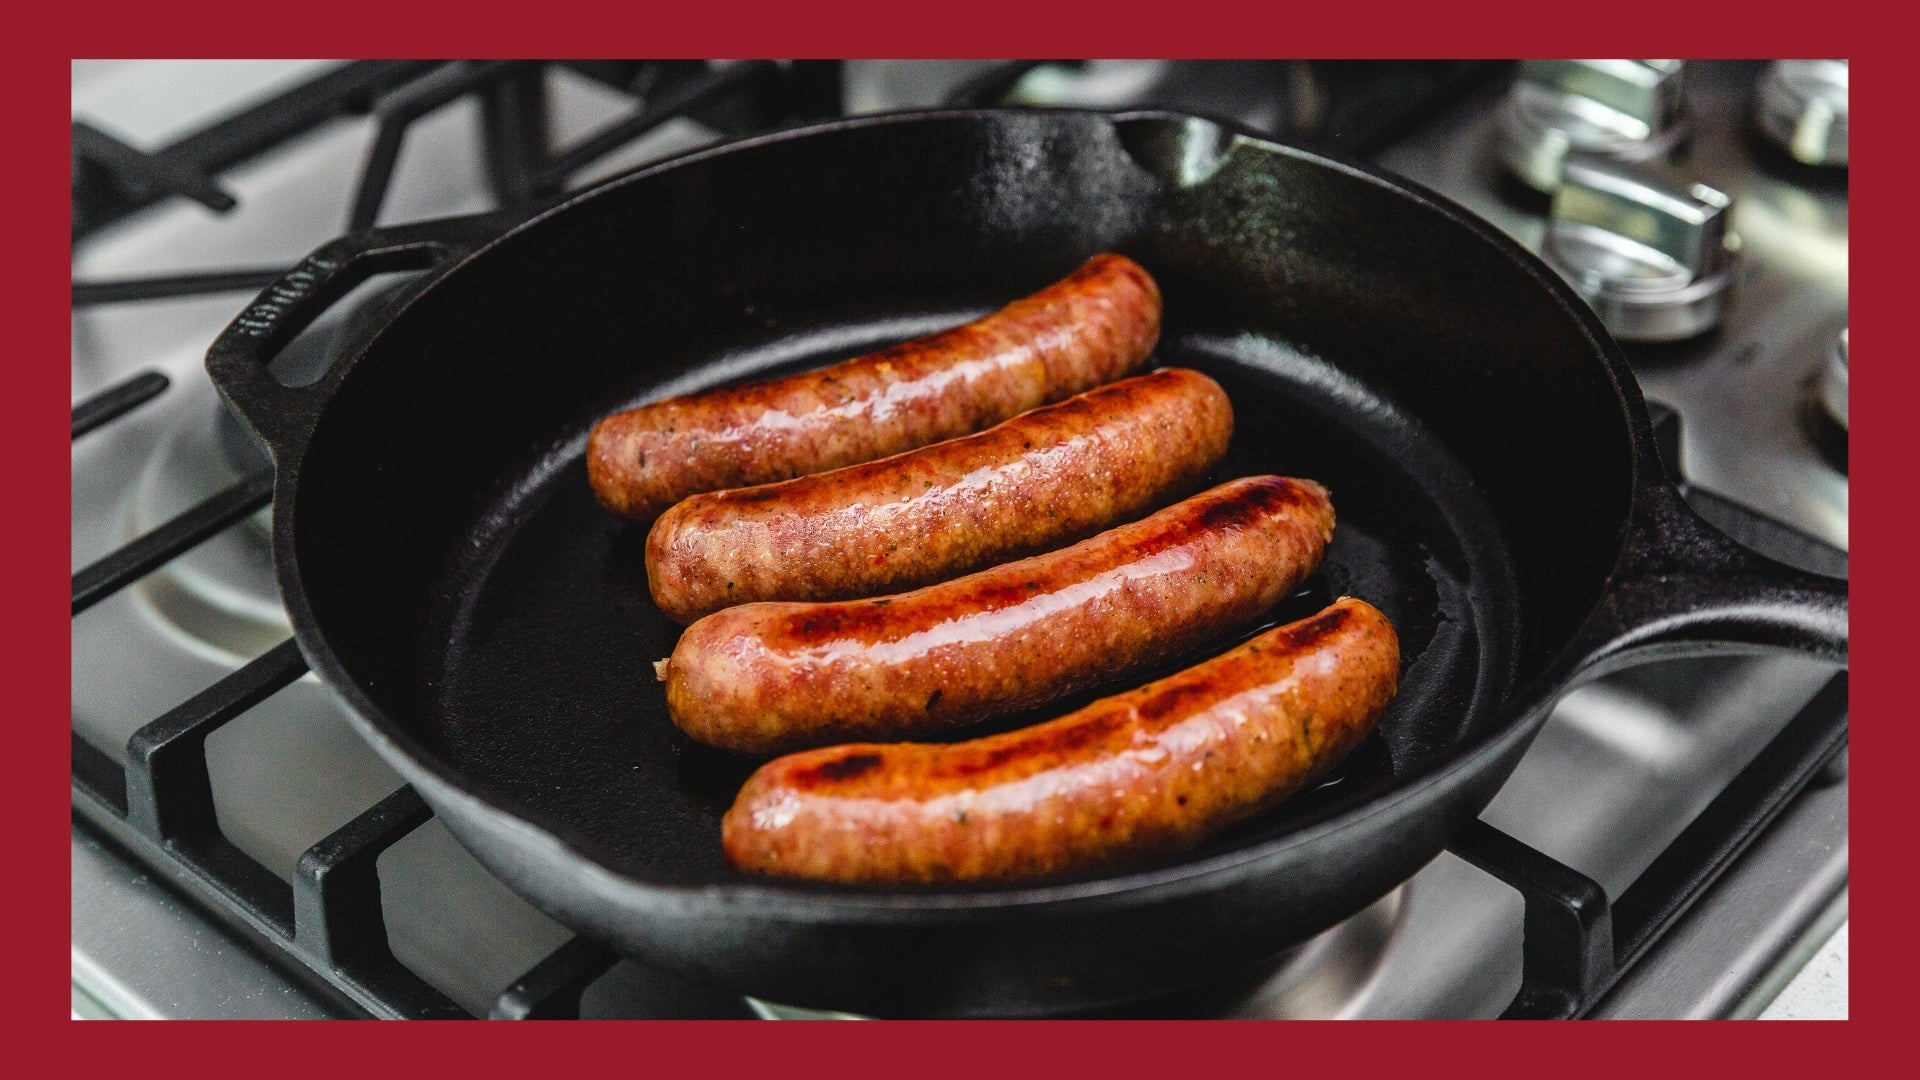 Bratwursts cooking in a cast iron skillet.